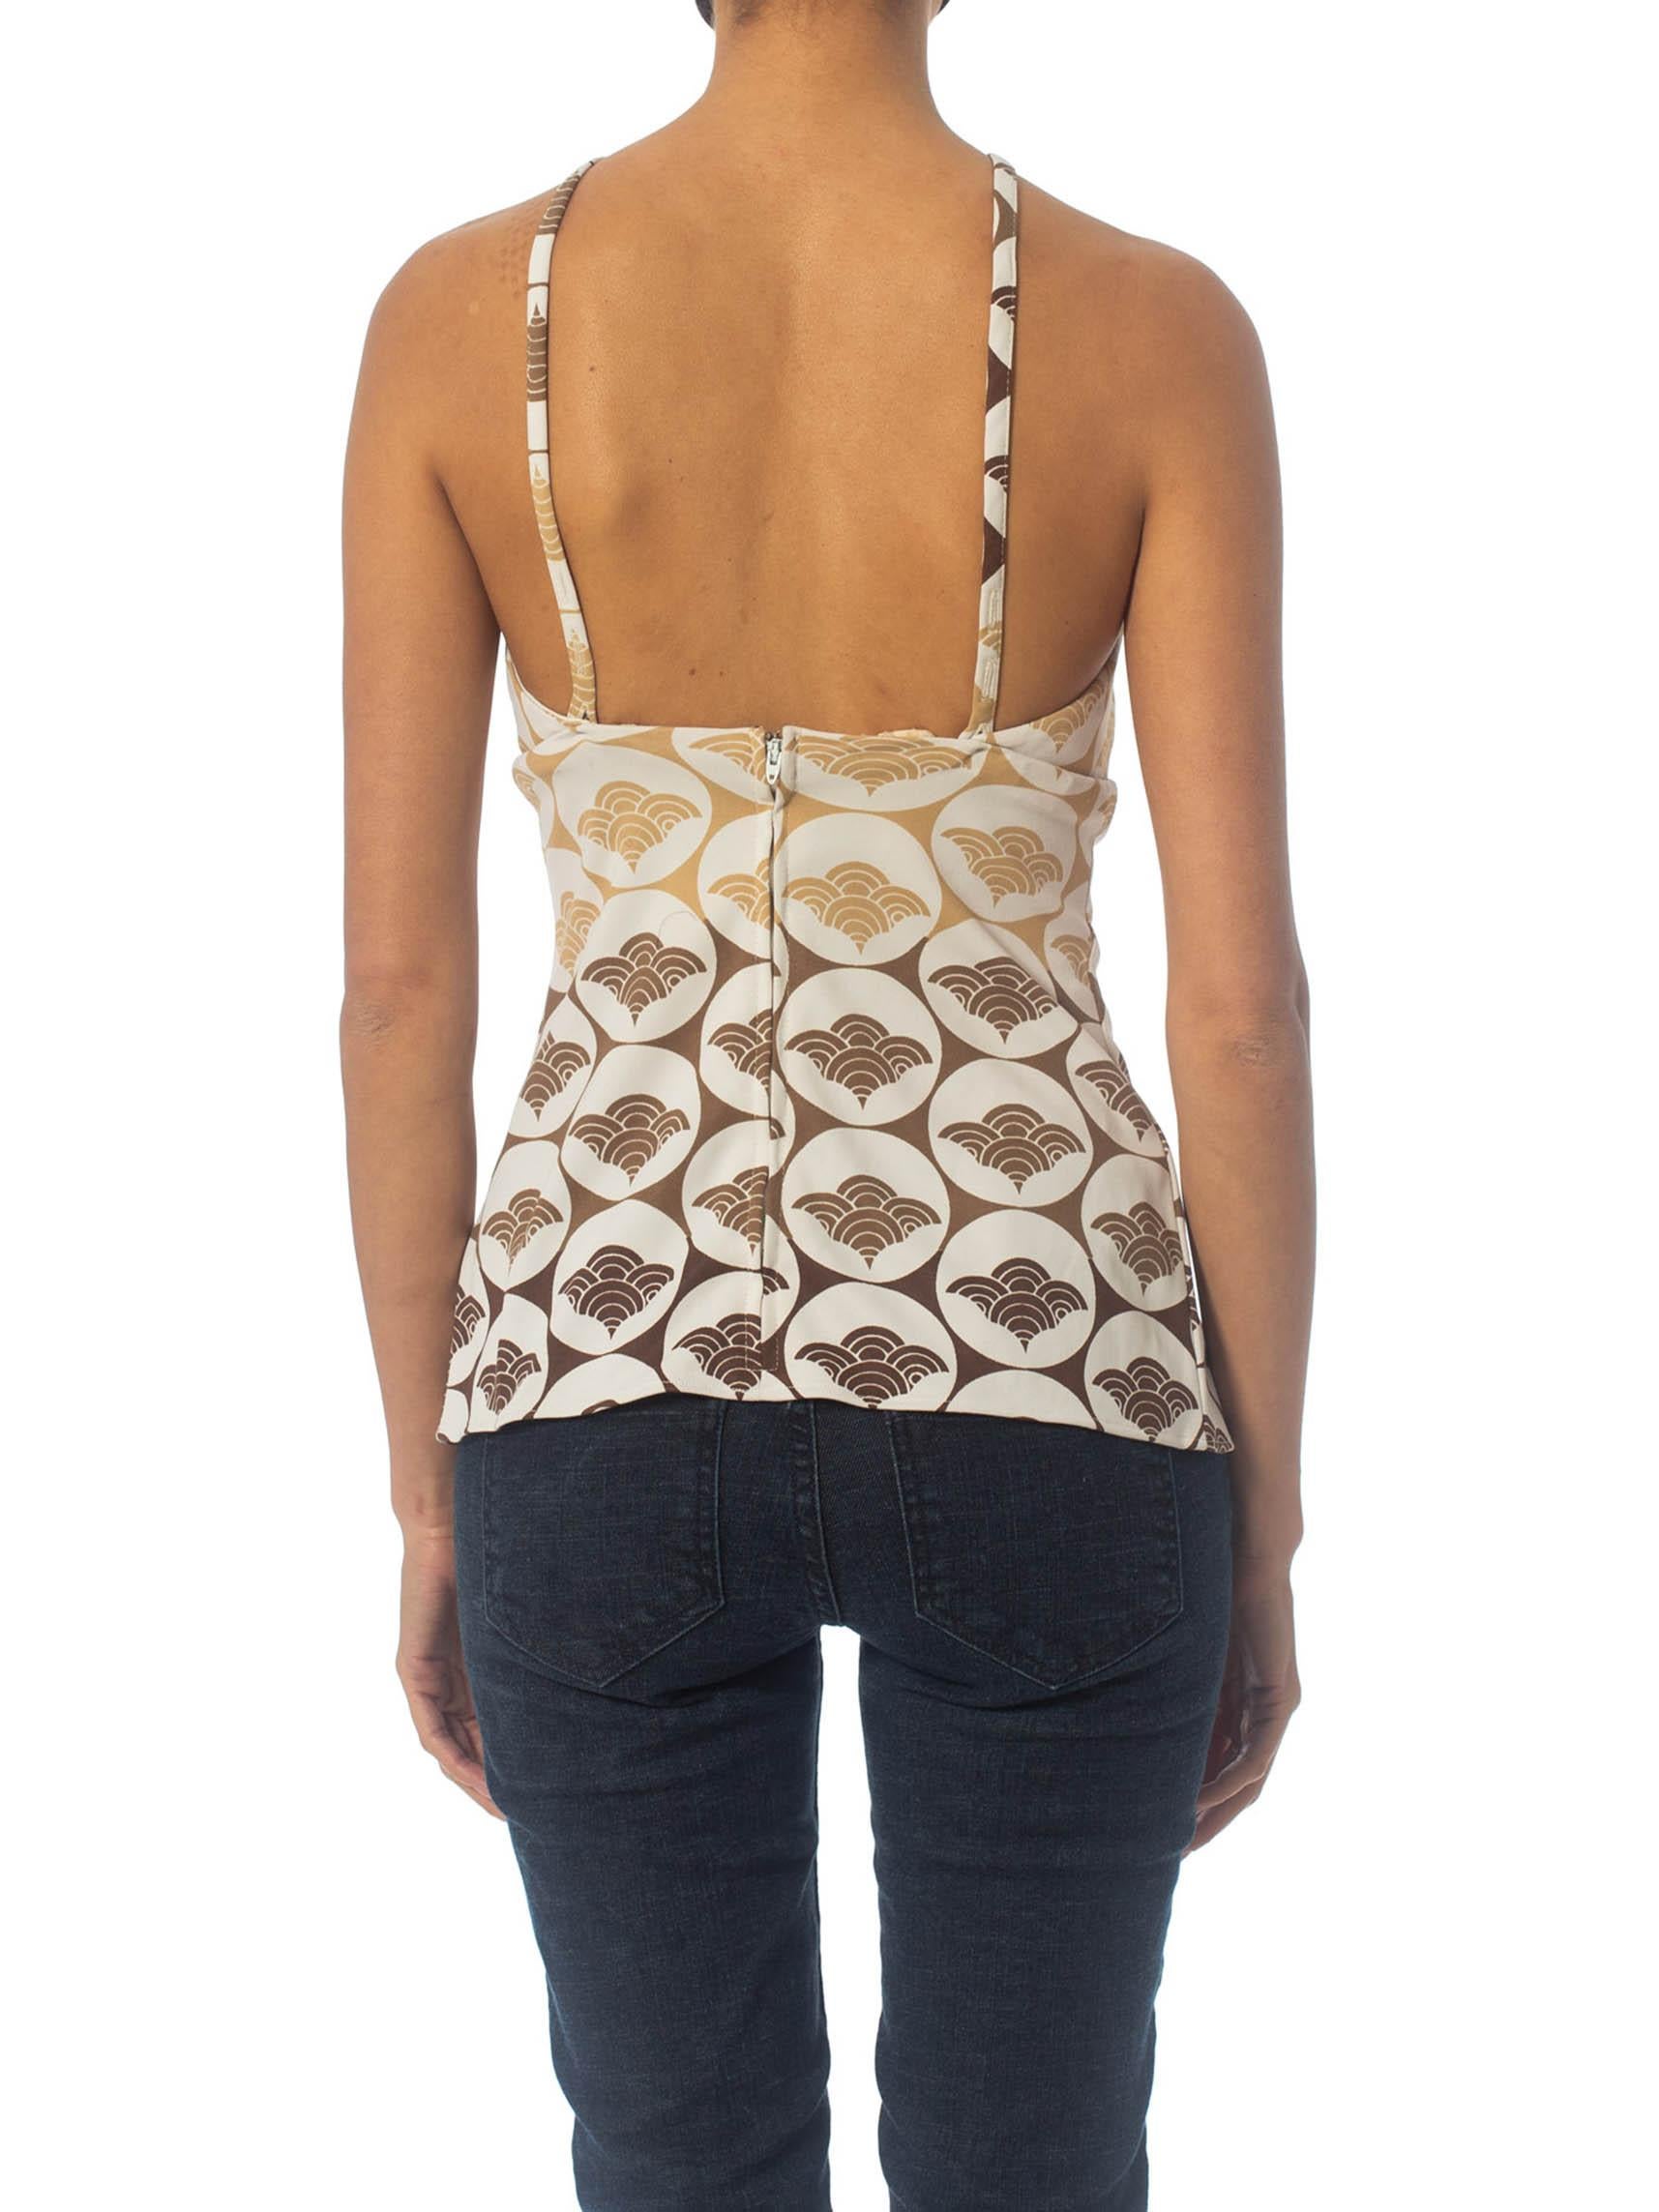 Women's 1970S Polyester Jersey Disco Halter Top With Japanese Crane Print